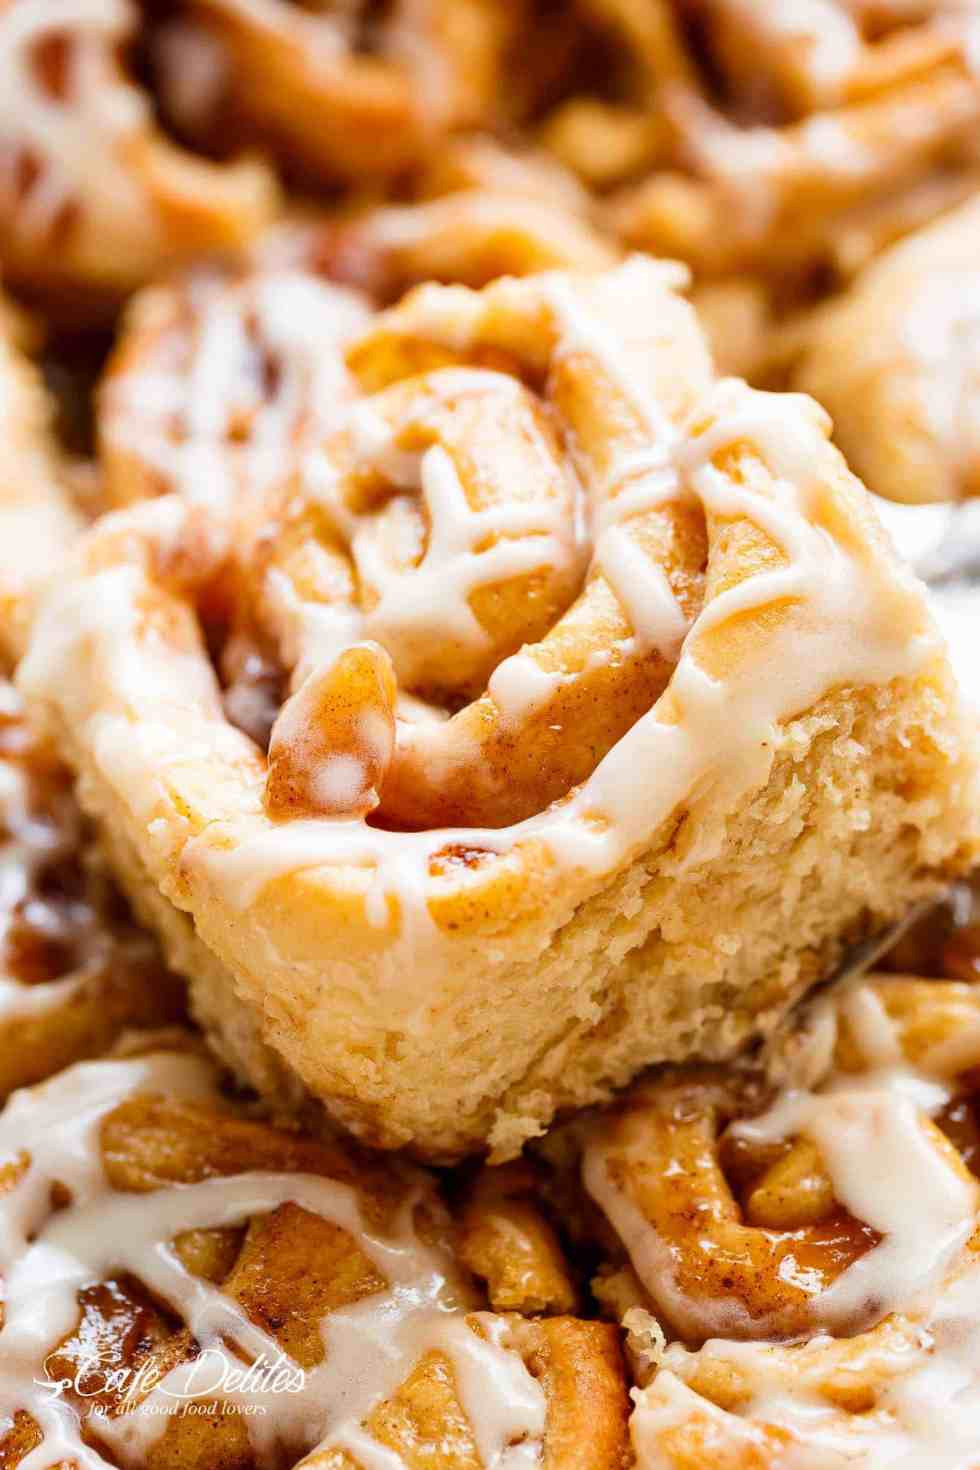 Apple Pie With Cinnamon Rolls
 Apple Pie Cinnamon Rolls With Cream Cheese Frosting Cafe